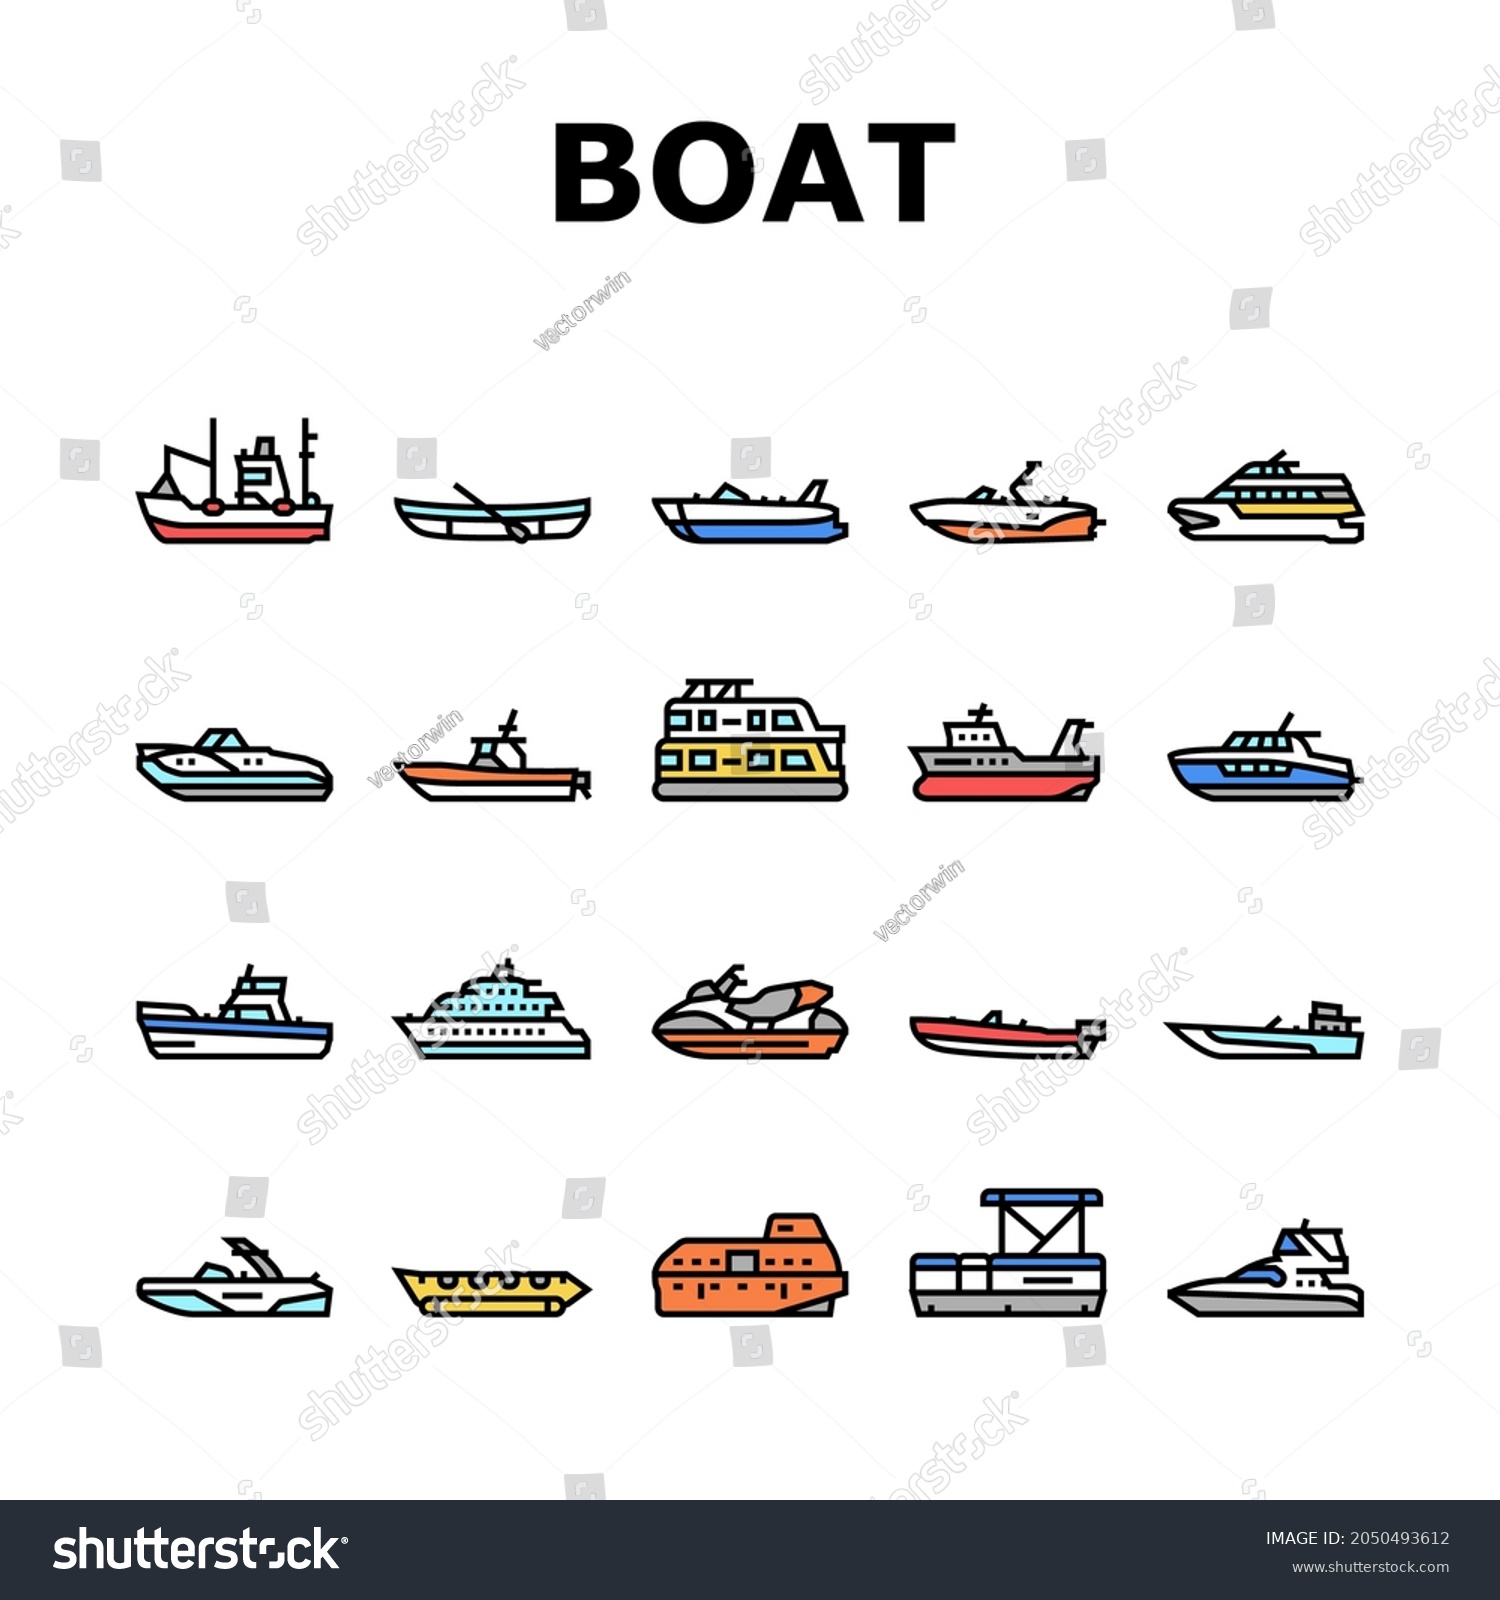 SVG of Boat Water Transportation Types Icons Set Vector. Runabout And Catamaran, Fishing And Bowrider, Motor Yacht And Cabin Cruiser Boat Line. Ship And Motorboat Transport Color Illustrations svg